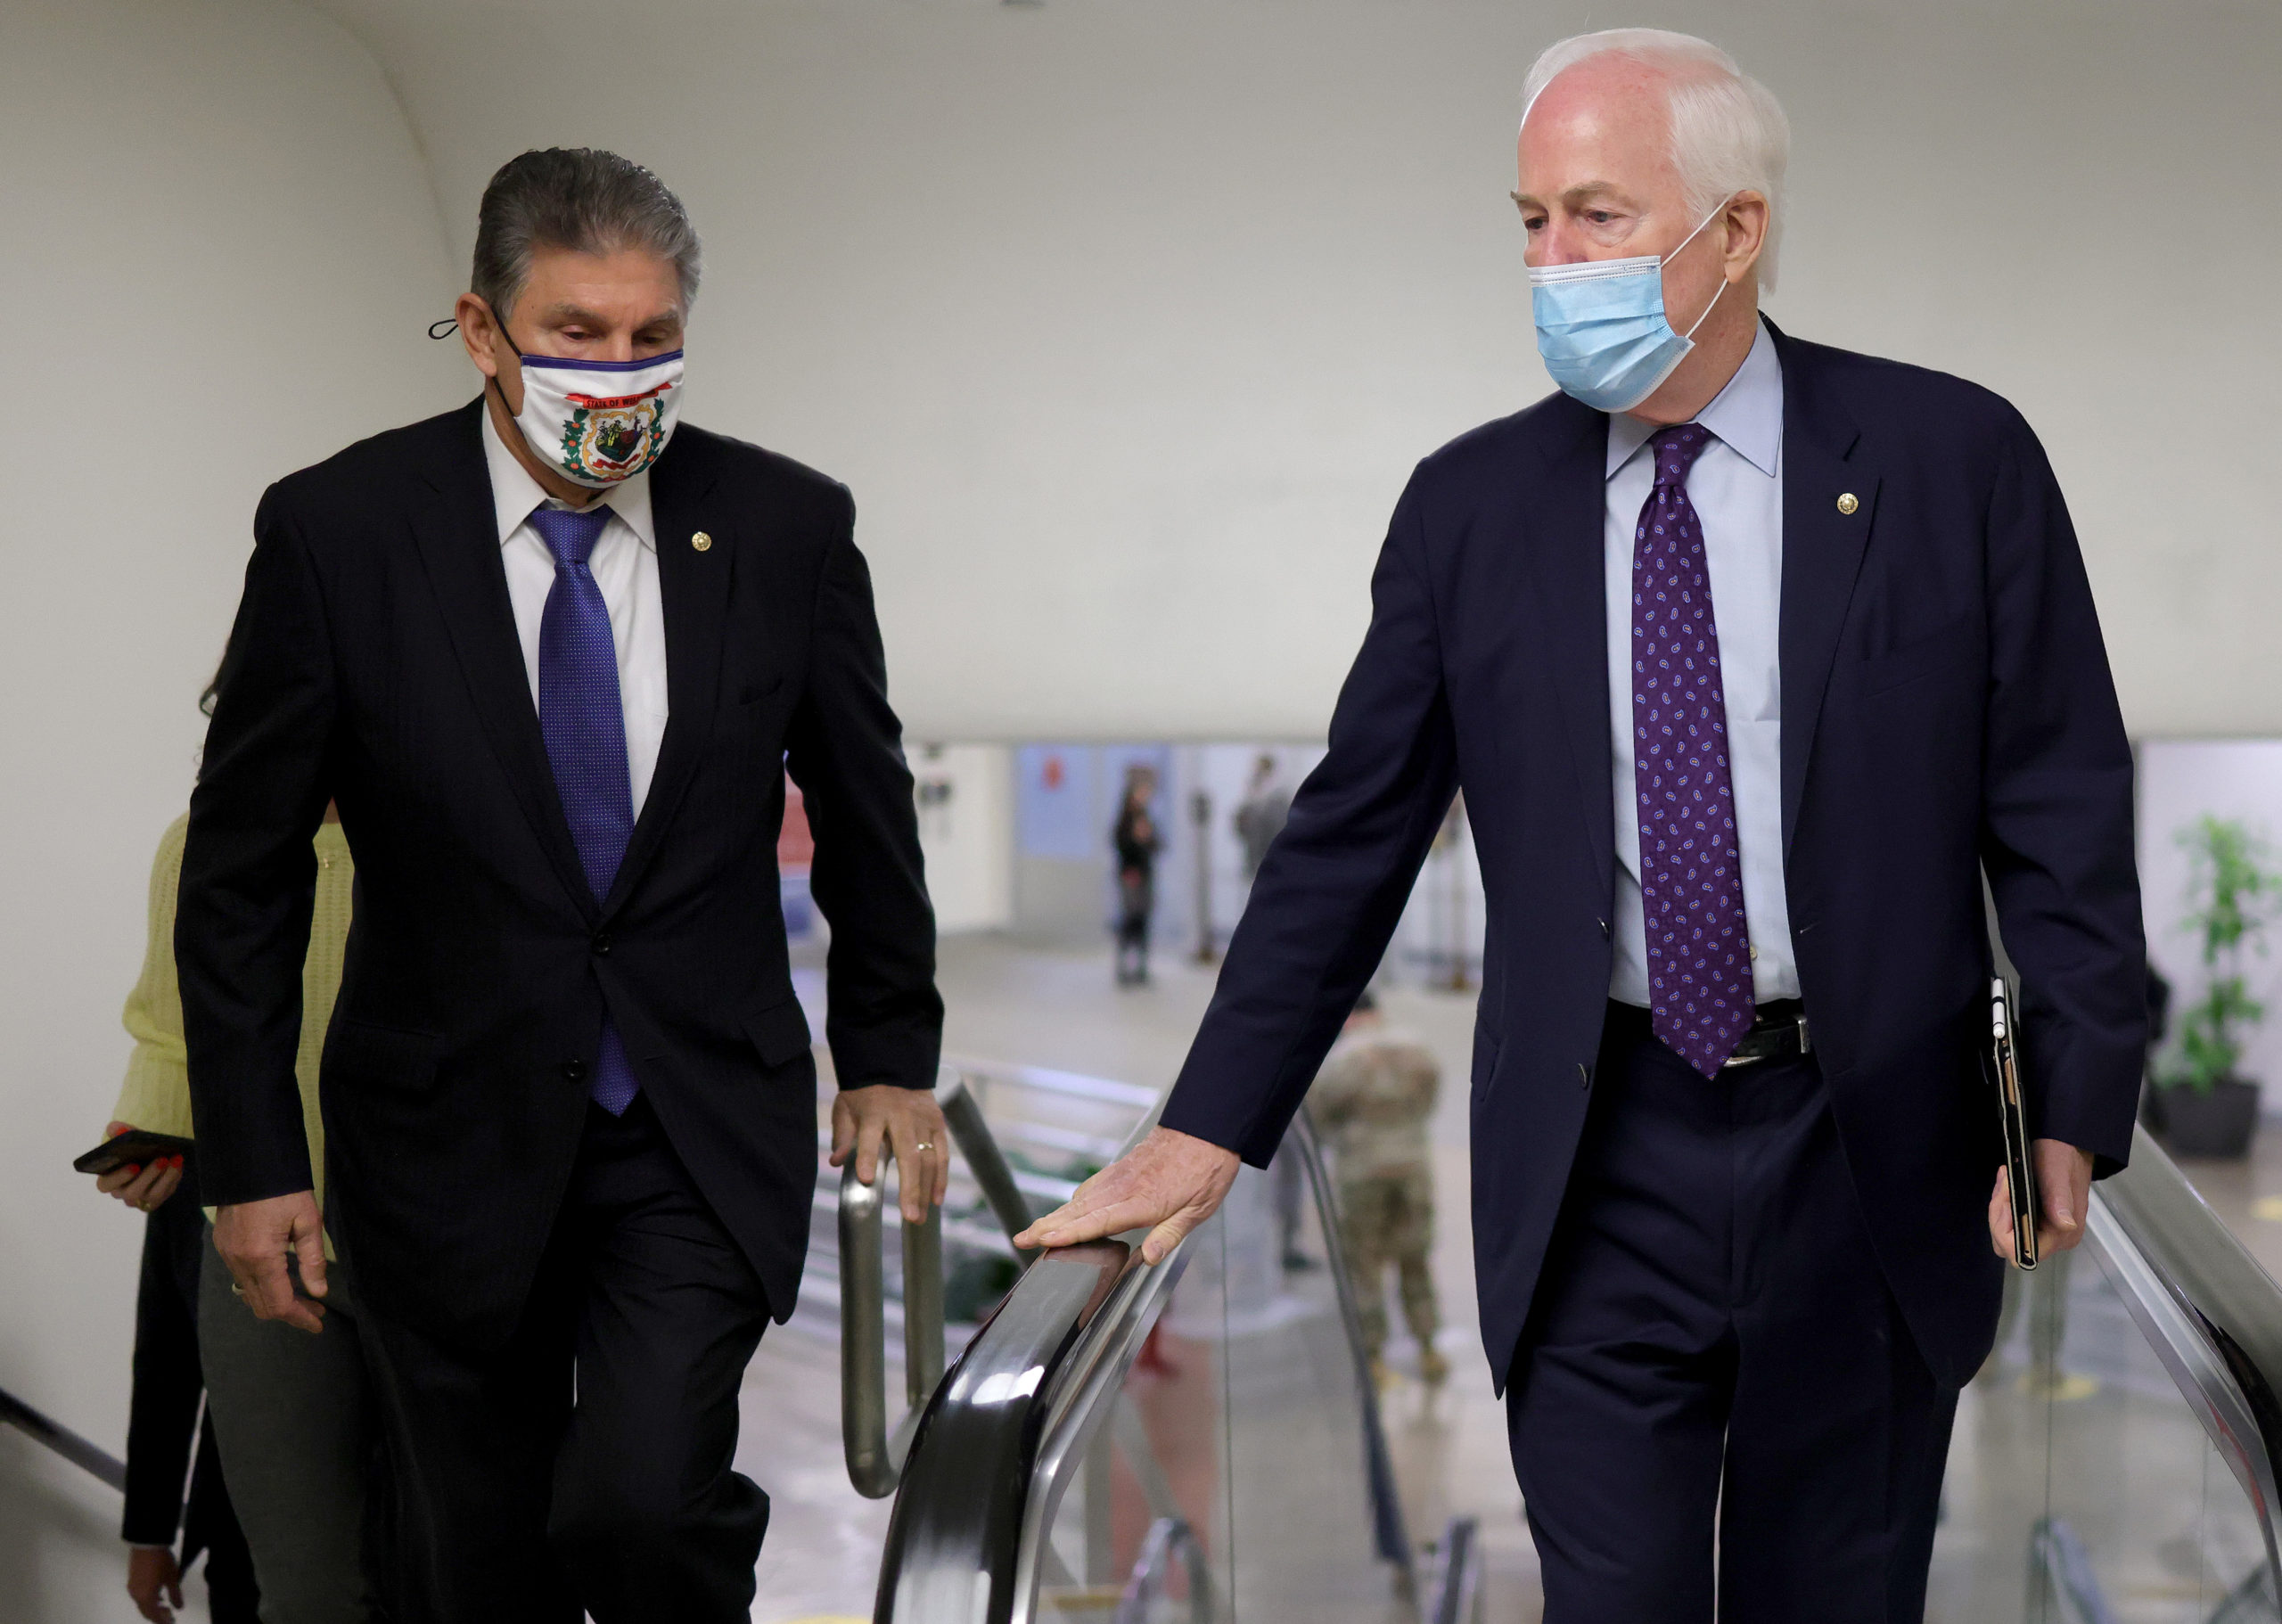 Texas Republican Sen. John Cornyn talks with West Virginia Democratic Sen. Joe Manchin while walking to the U.S. Senate chamber for a vote March 05, 2021. The Senate debated the latest COVID-19 relief bill for over 24 hours, and it passed late Saturday morning. (Win McNamee/Getty Images)